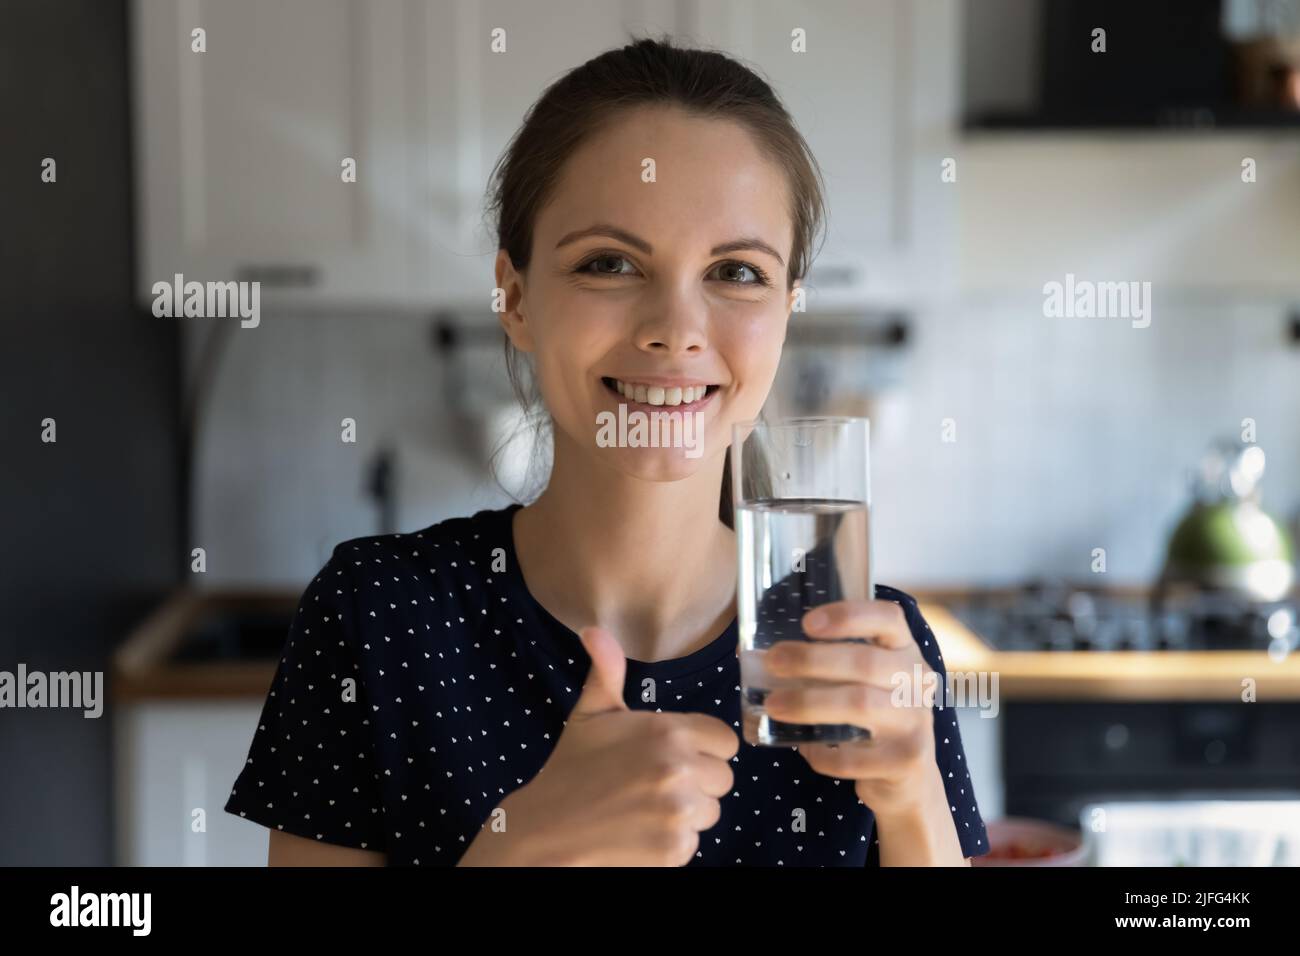 Happy beautiful girl drinking fresh water in home kitchen Stock Photo